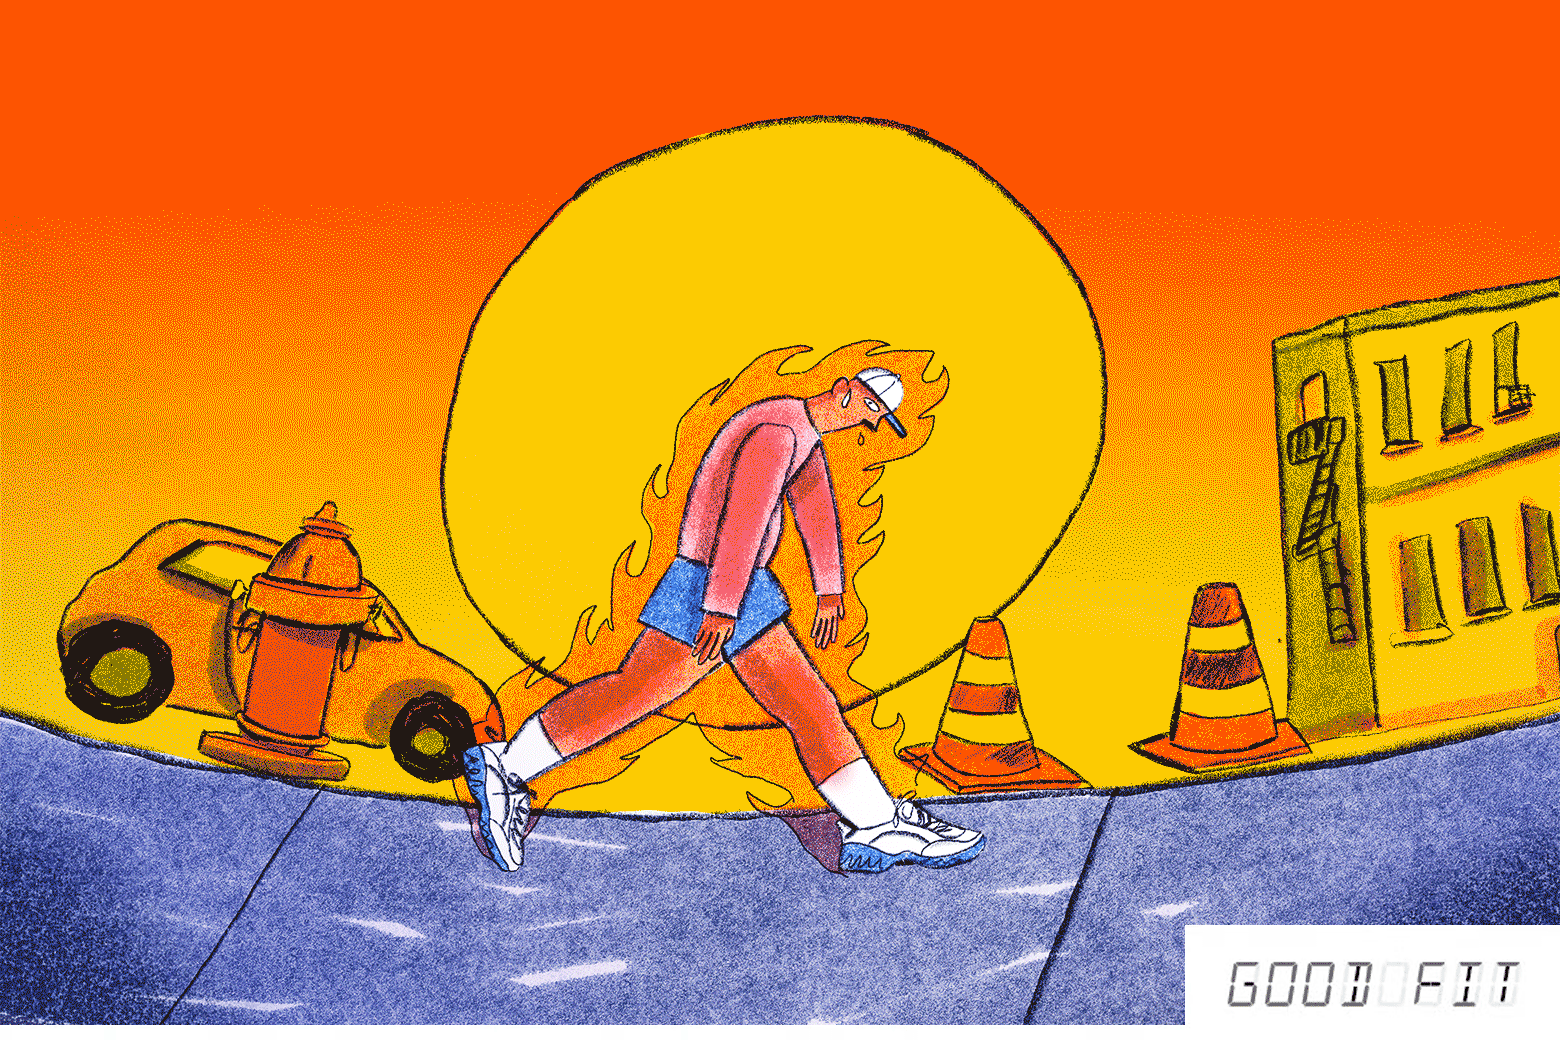 An animated sketch of a person walking down a sidewalk on a hot street under a large sun. They are wearing a white baseball hat, pink T-shirt, and blue shorts, and are sweating and engulfed in flames.